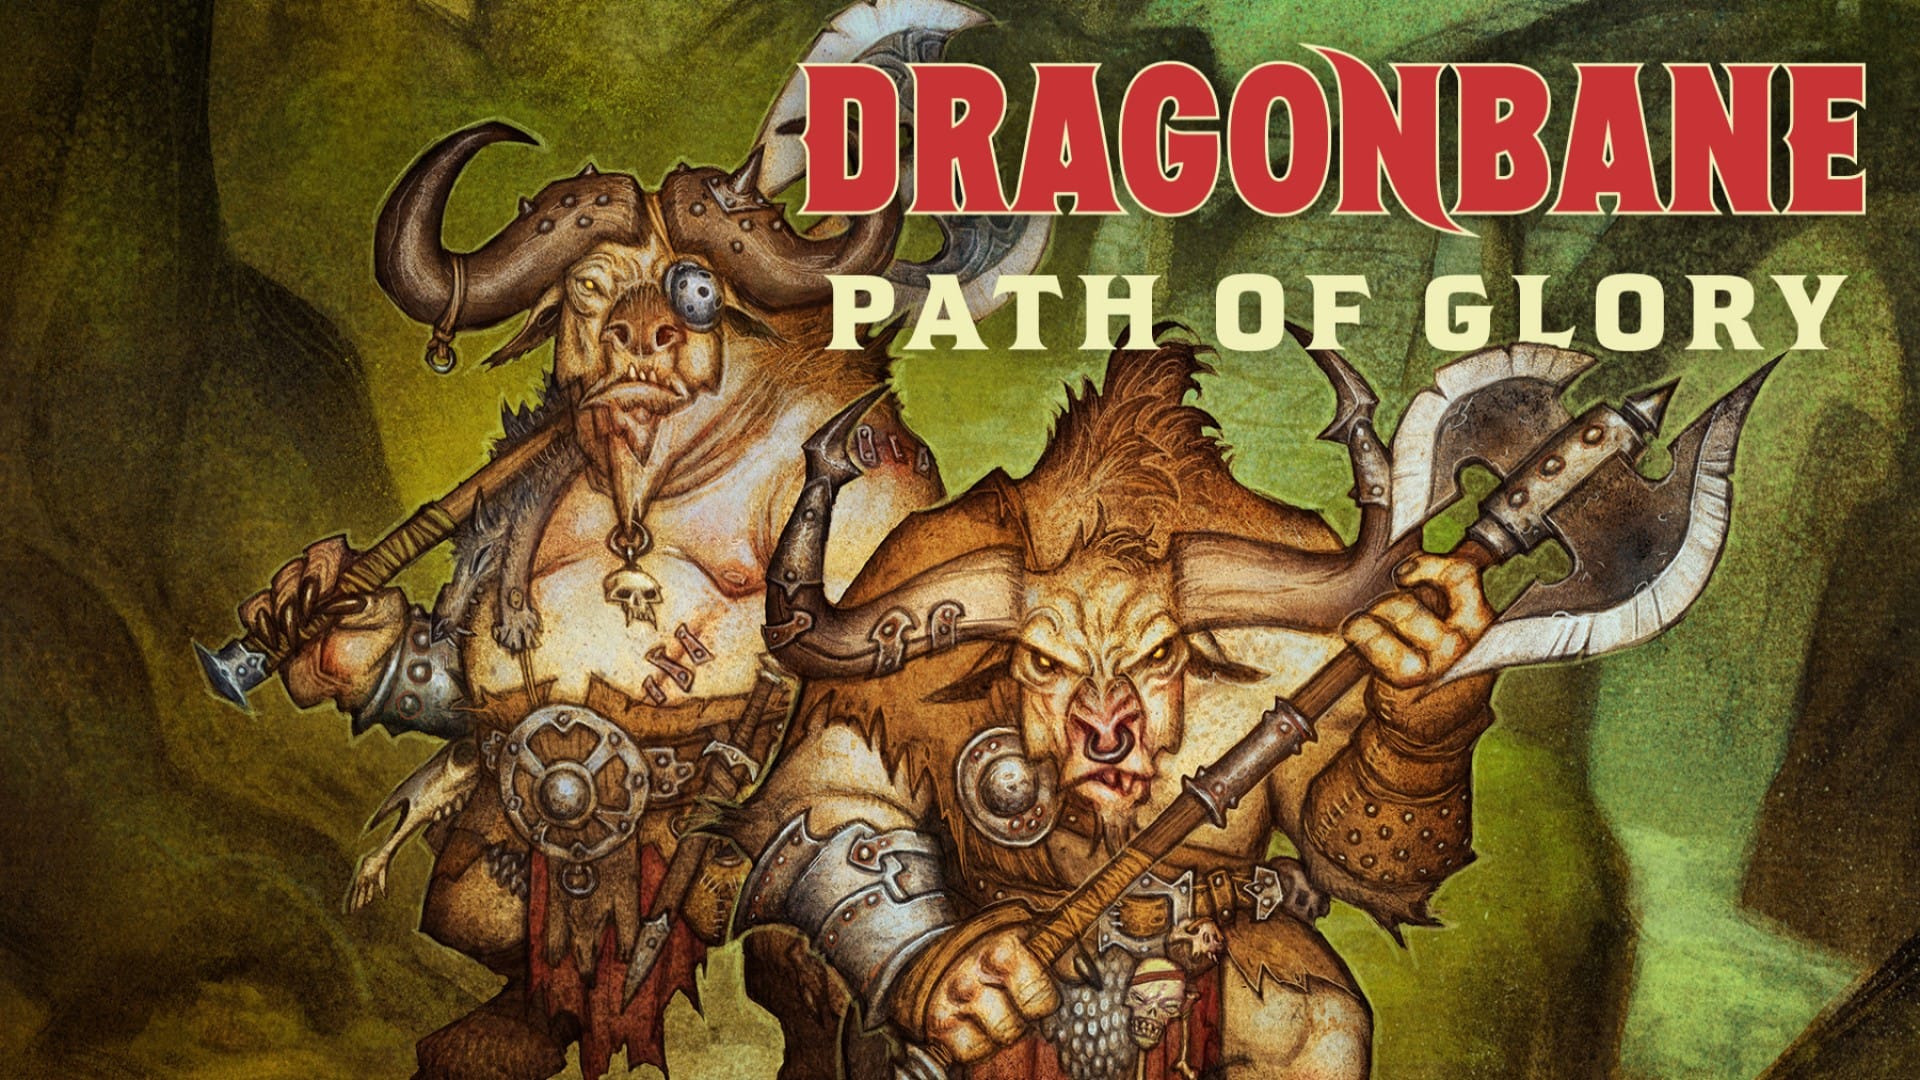 A promotional image of Dragonbane Path of Glory, featuring two minotaurs brandishing axes.